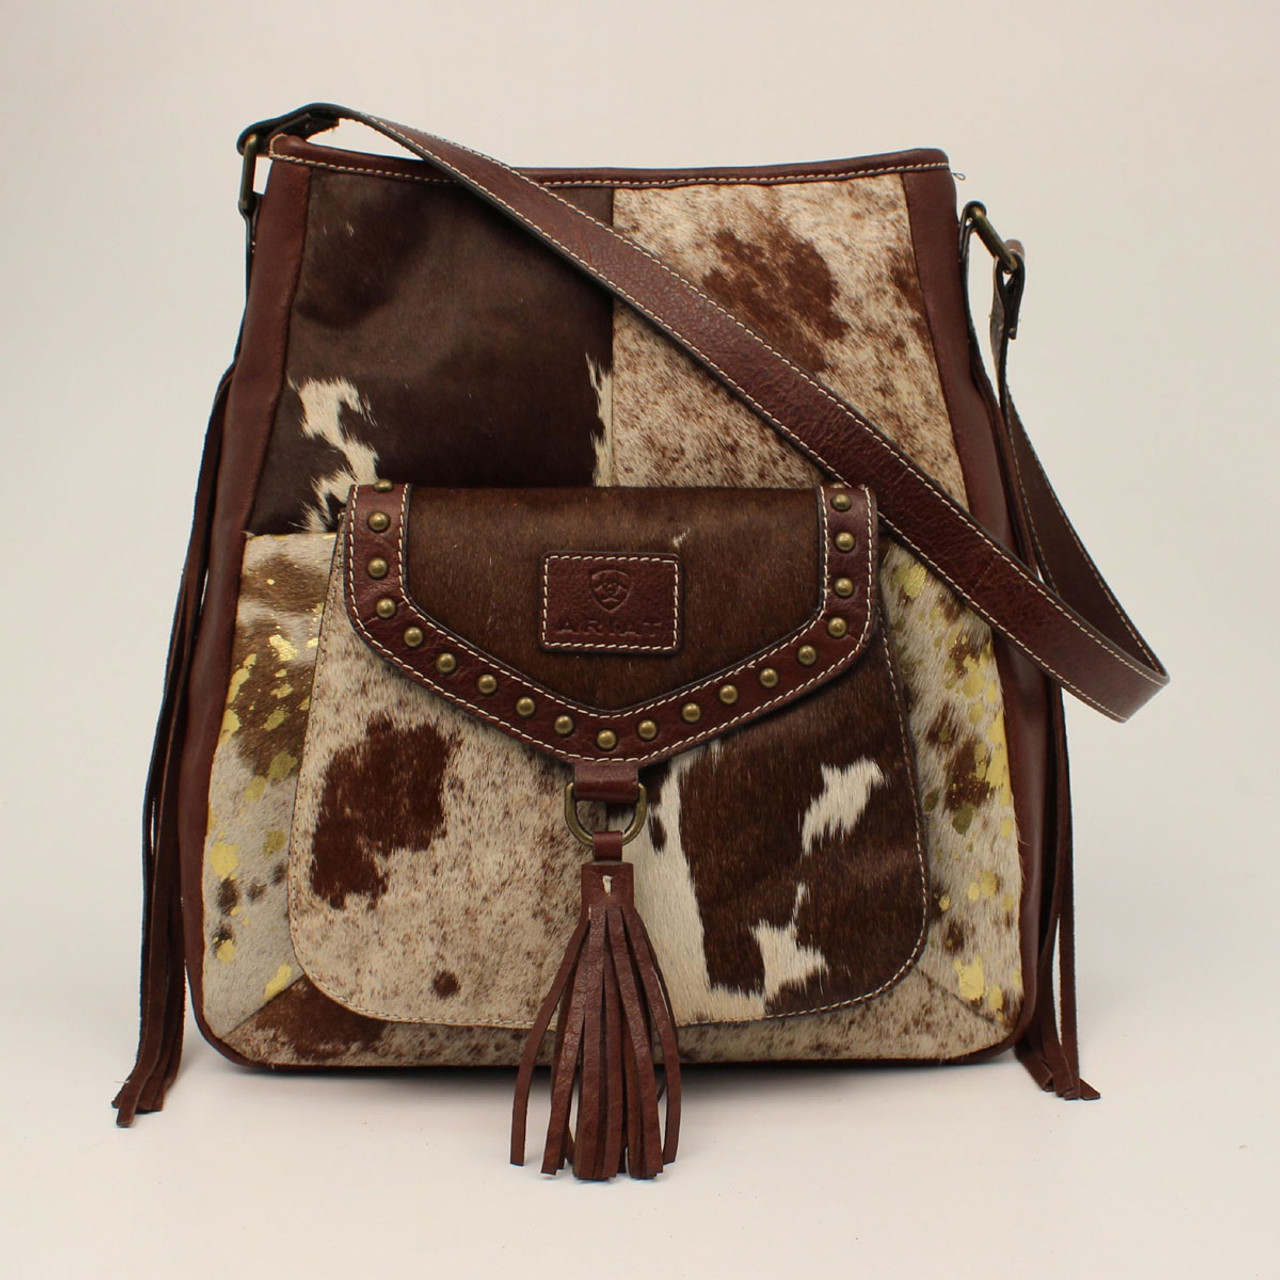 B8 Ready to ship! Western Leather & Cowhide Handbag Rodeo Purse Tooled Embossed Leather w/ Bucking Horse Fringe Tote